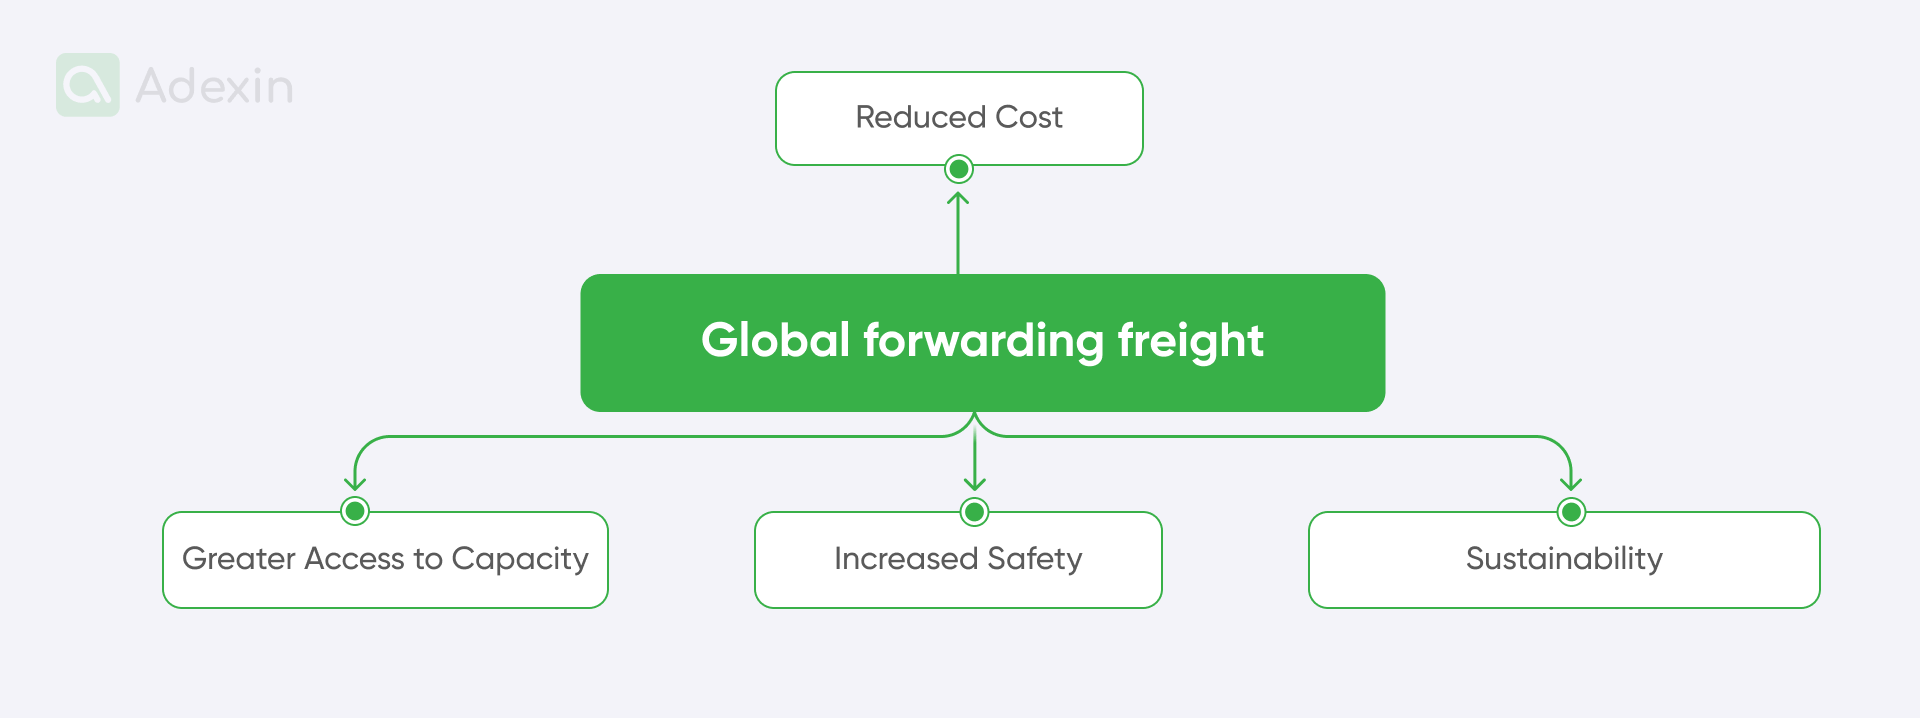 Advantages of using software for intermodal shipping